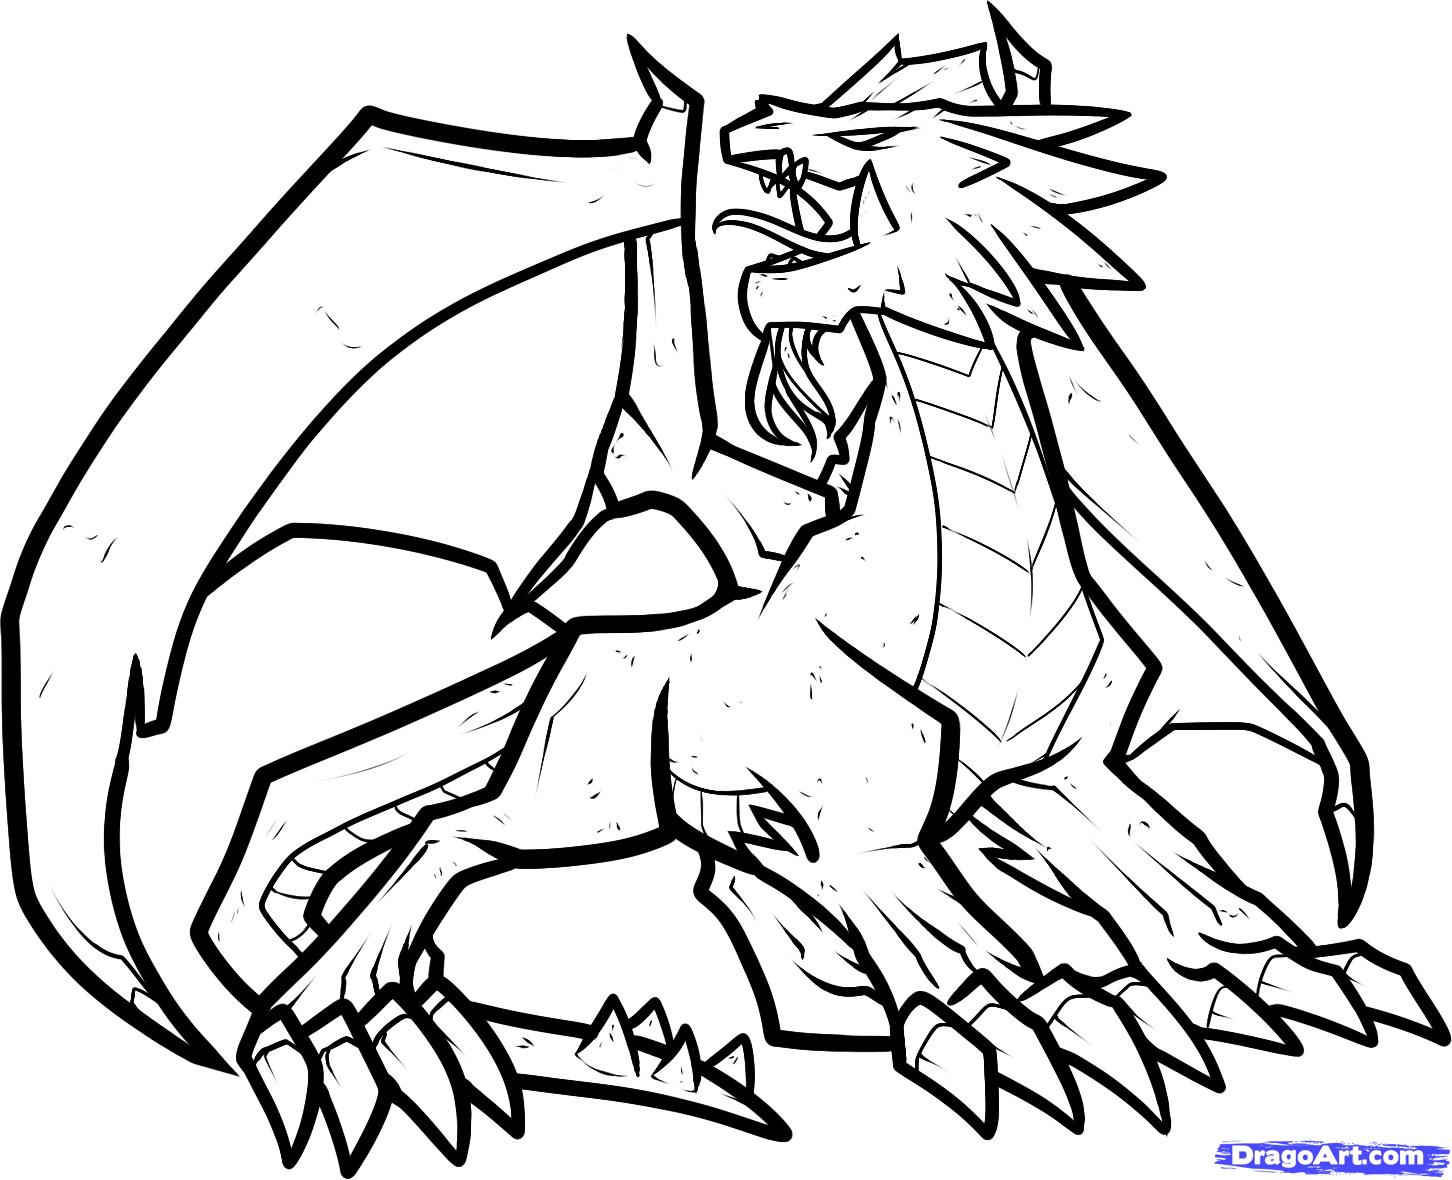 Black Dragon Coloring Pages at GetColorings.com | Free printable